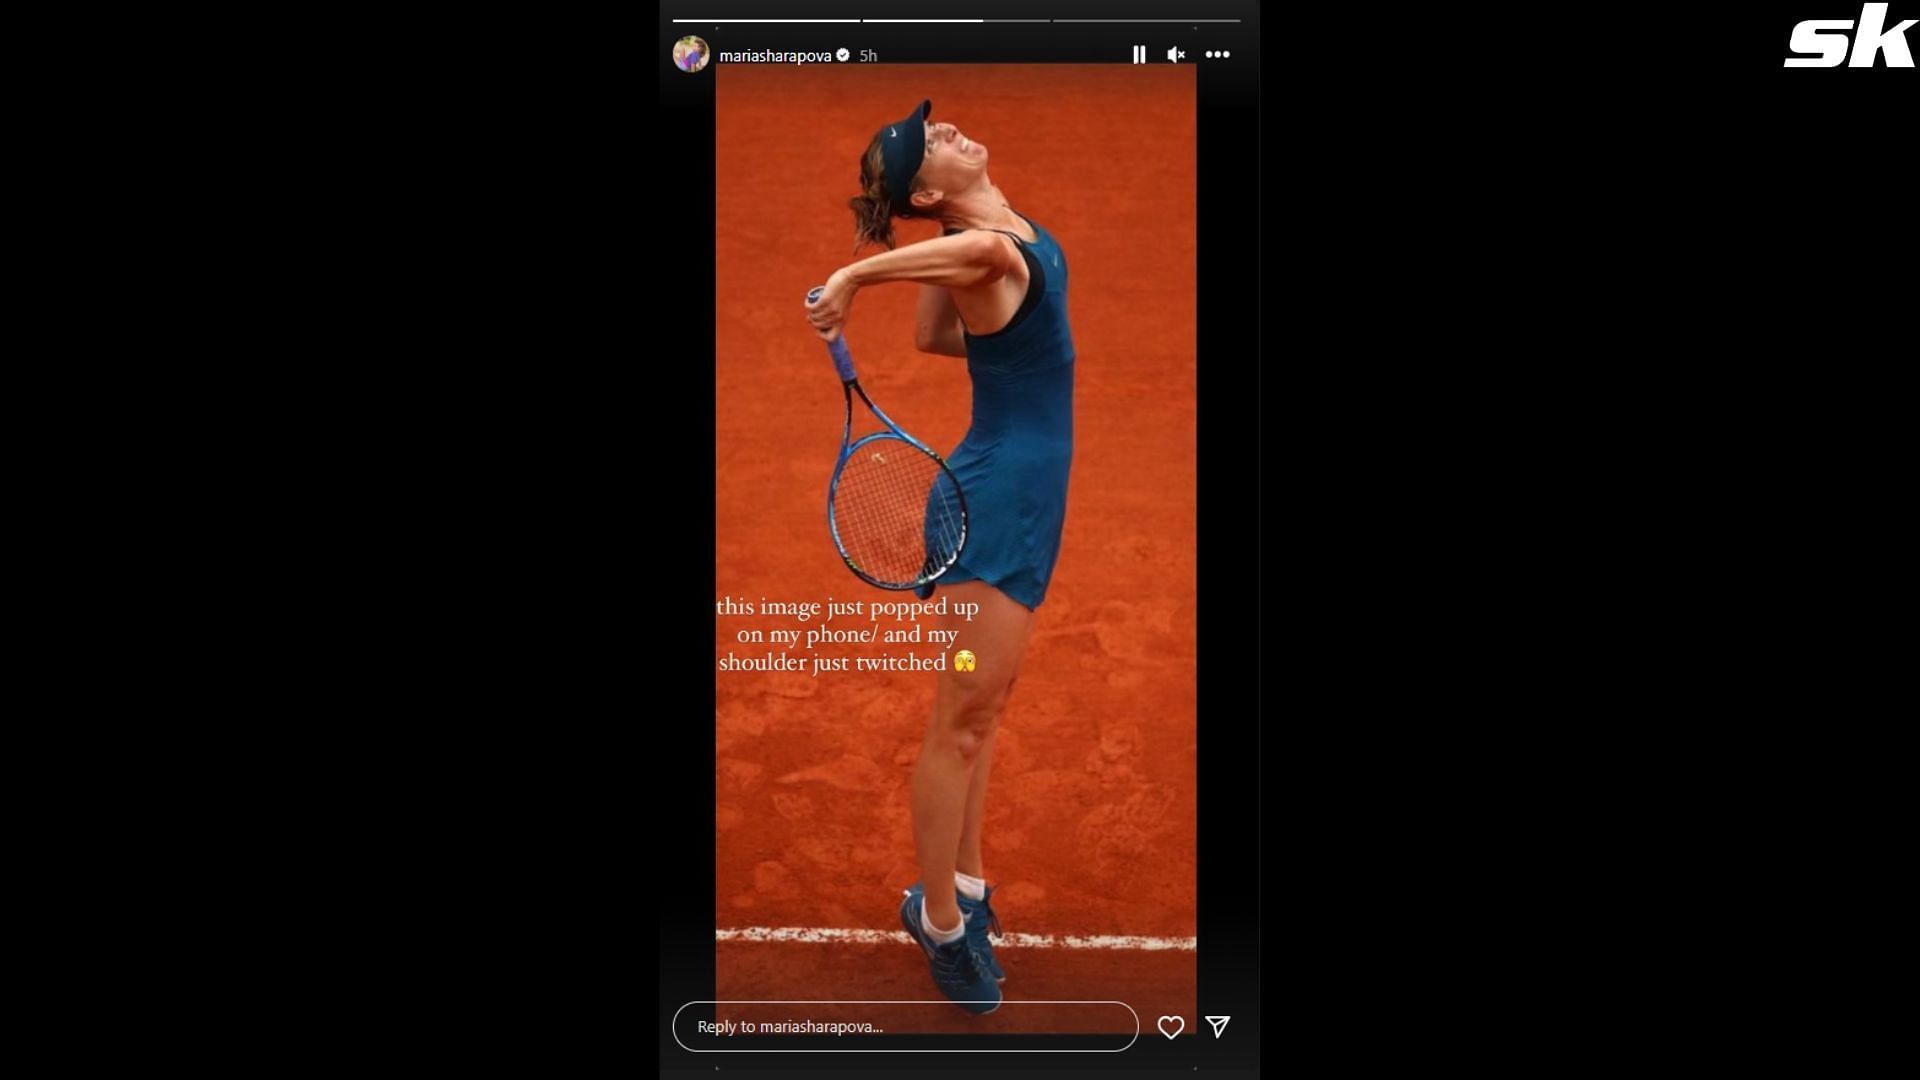 Maria Sharapova reacted to her awkward service action on Instagram.